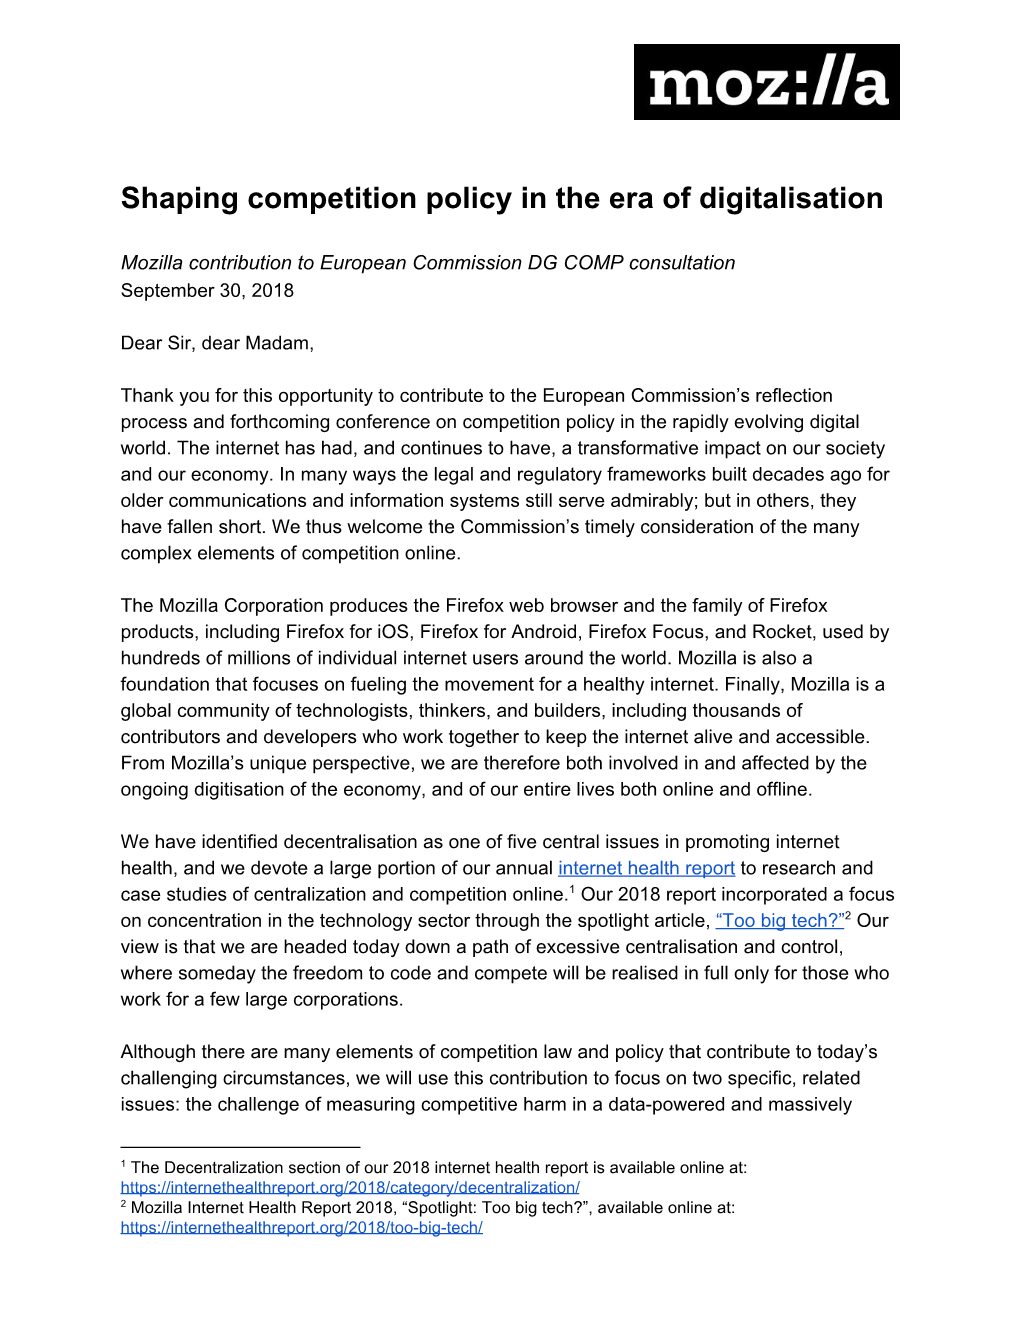 Shaping Competition Policy in the Era of Digitalisation